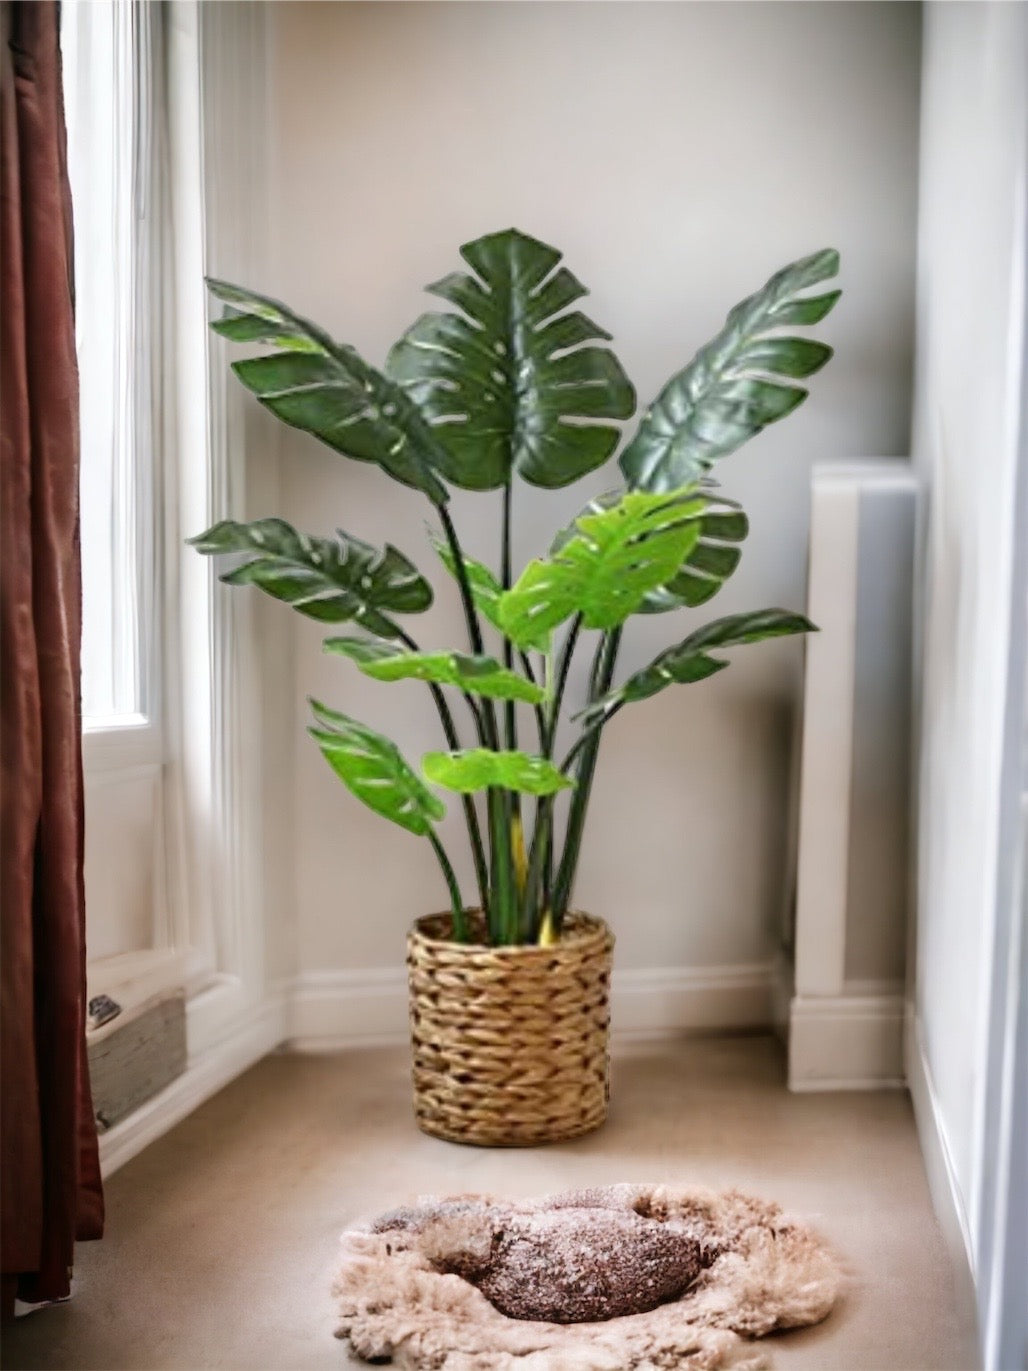 Artificial Monstera Deliciosa Plant Tree 5ft/59'' Fake Tropical Palm Tree with 10 Leaves